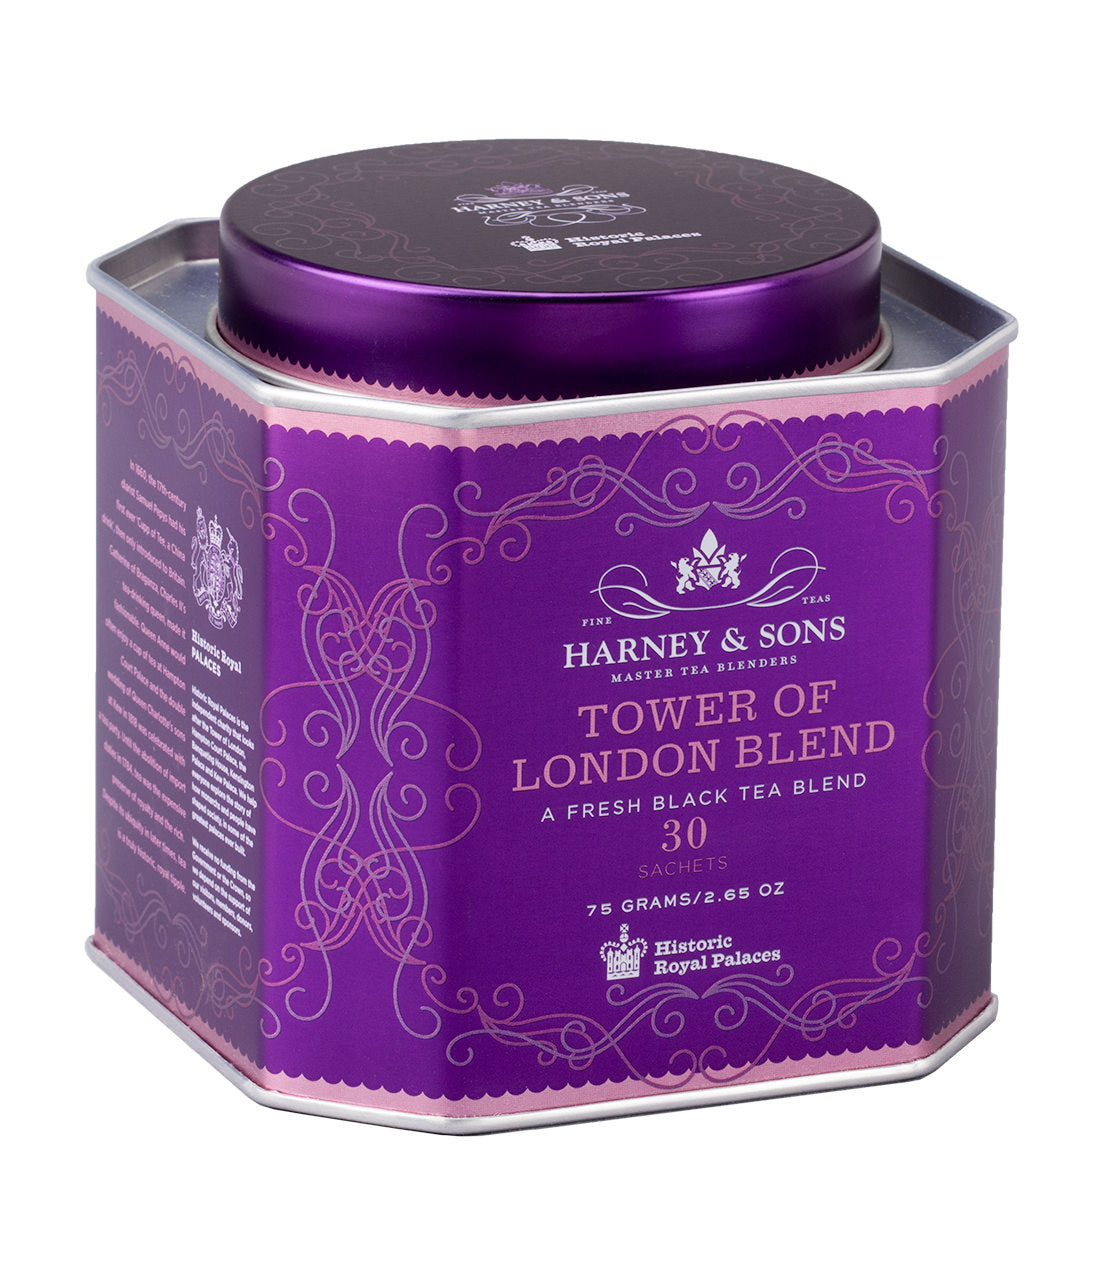 Tower of London Tea by Harney & Sons.